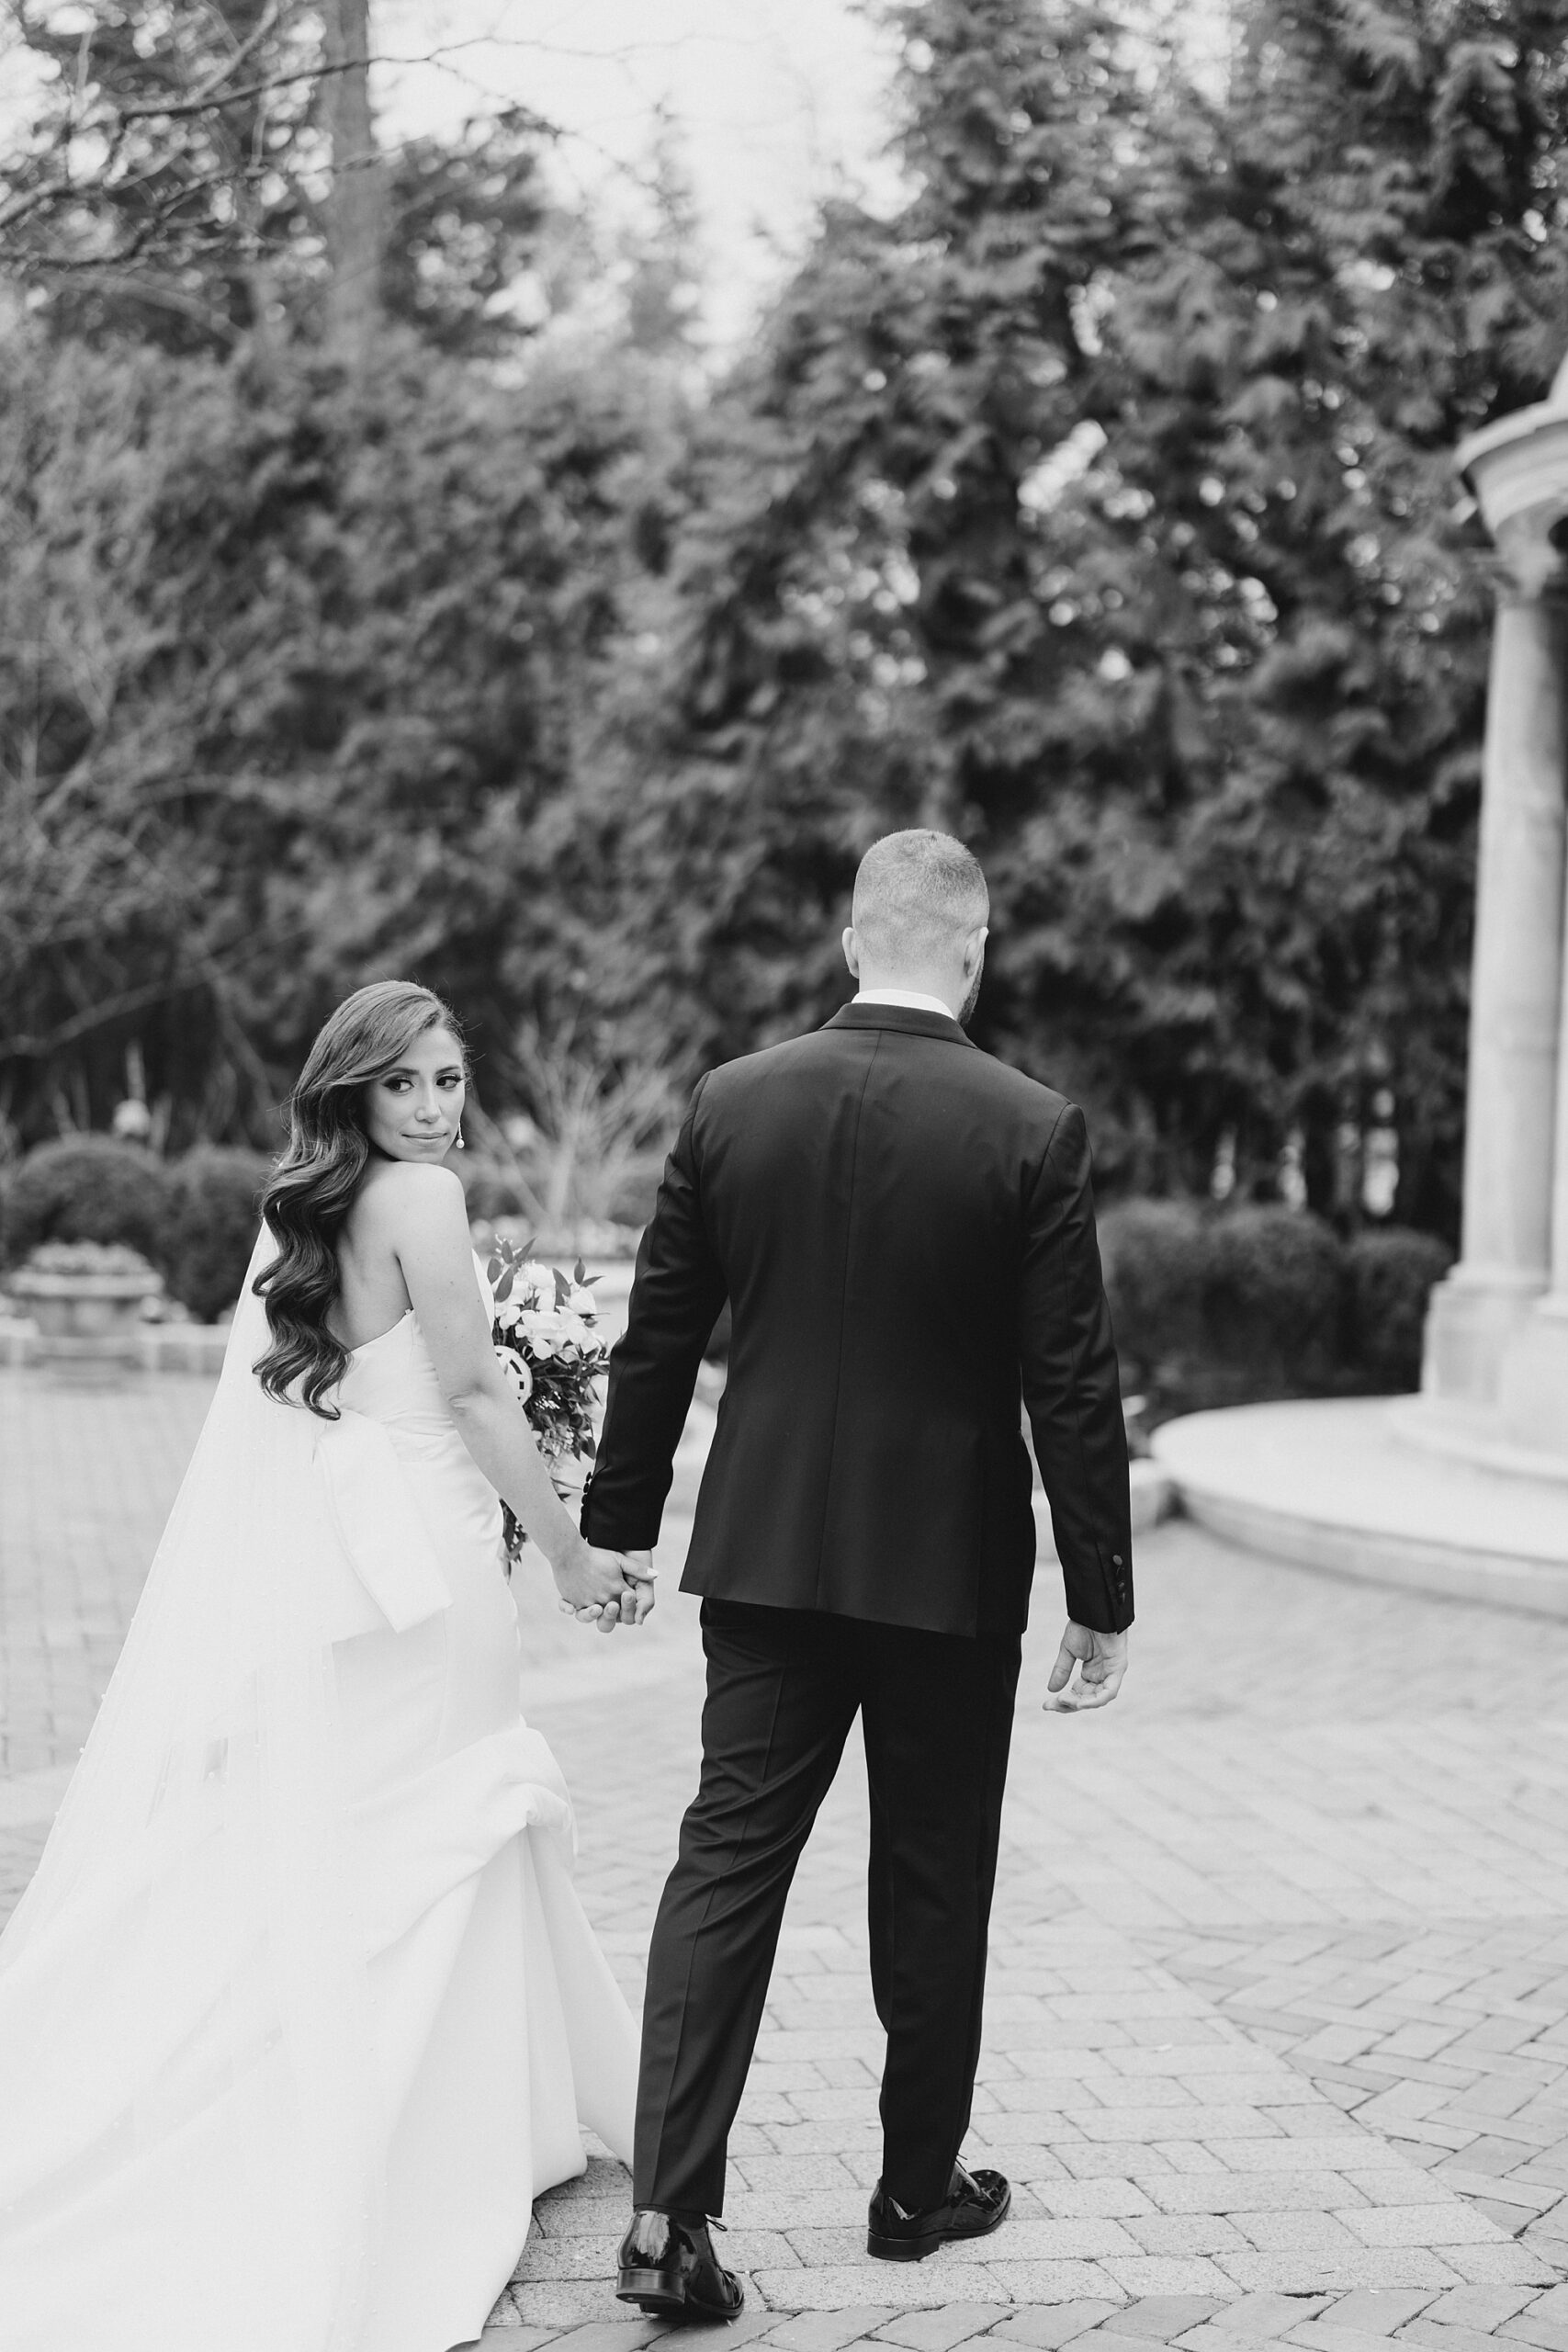 classic wedding portraits from New Jersey wedding